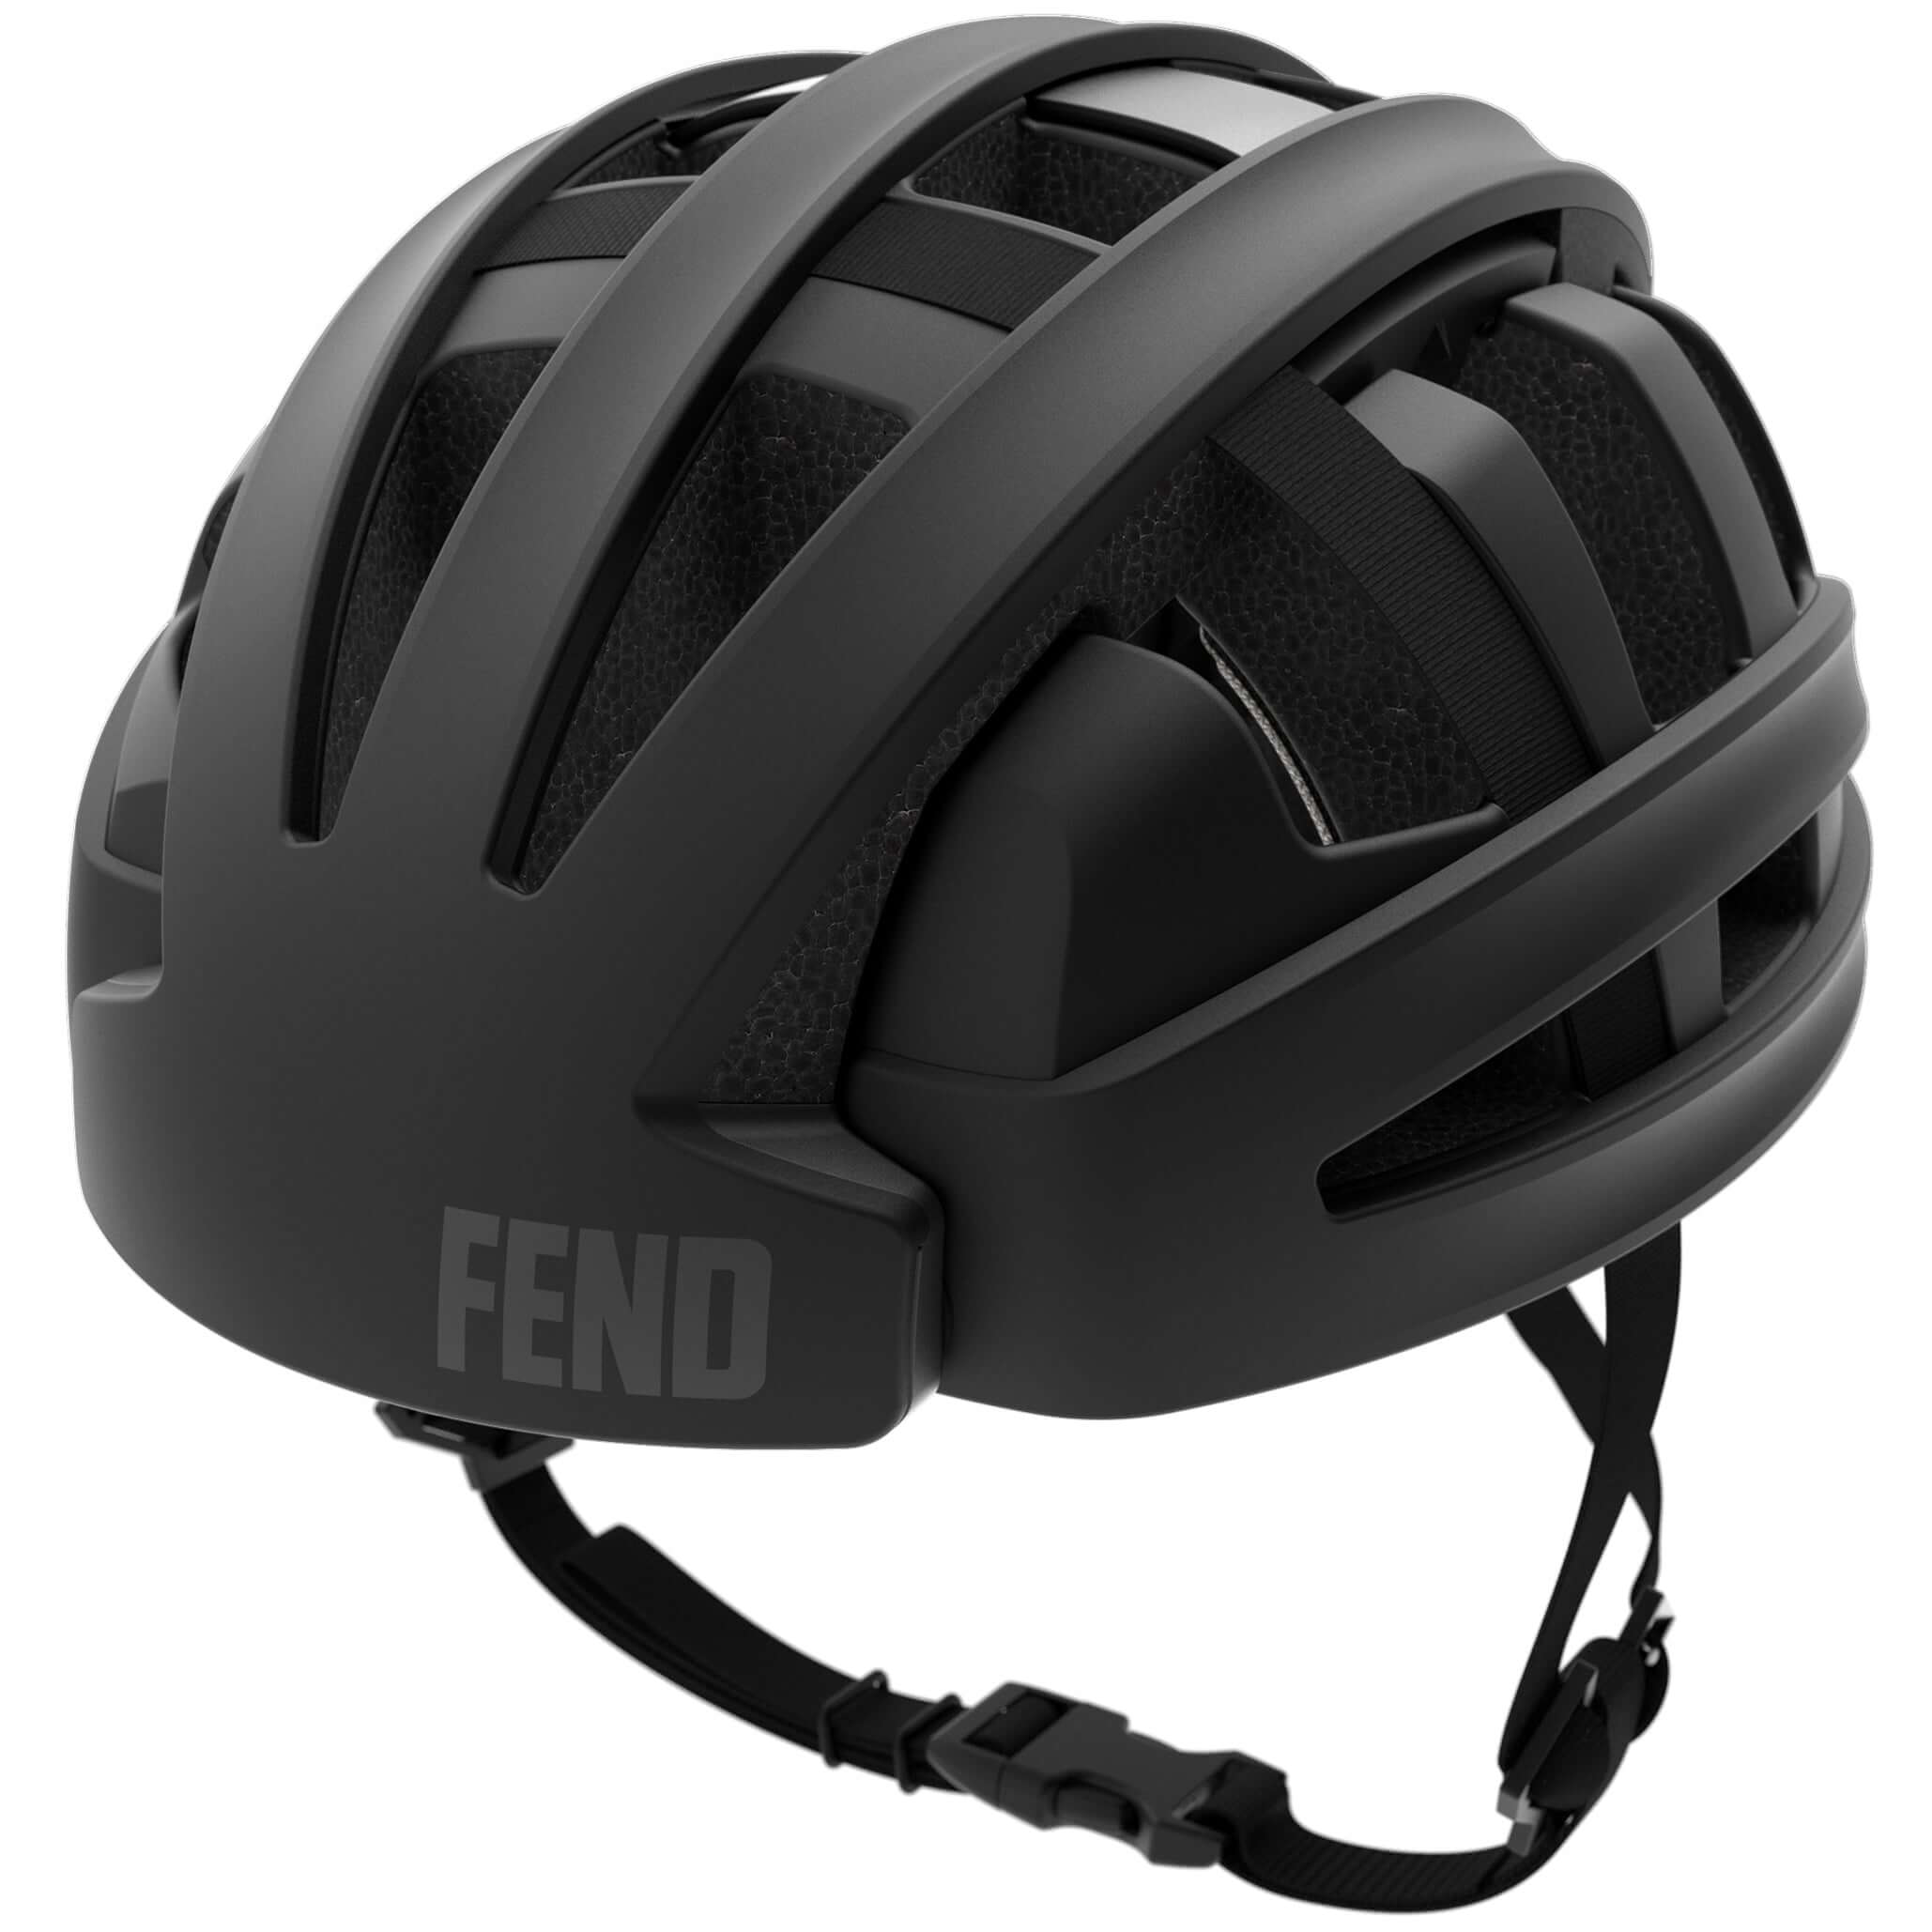 Fend collapsible cycling helmet in black